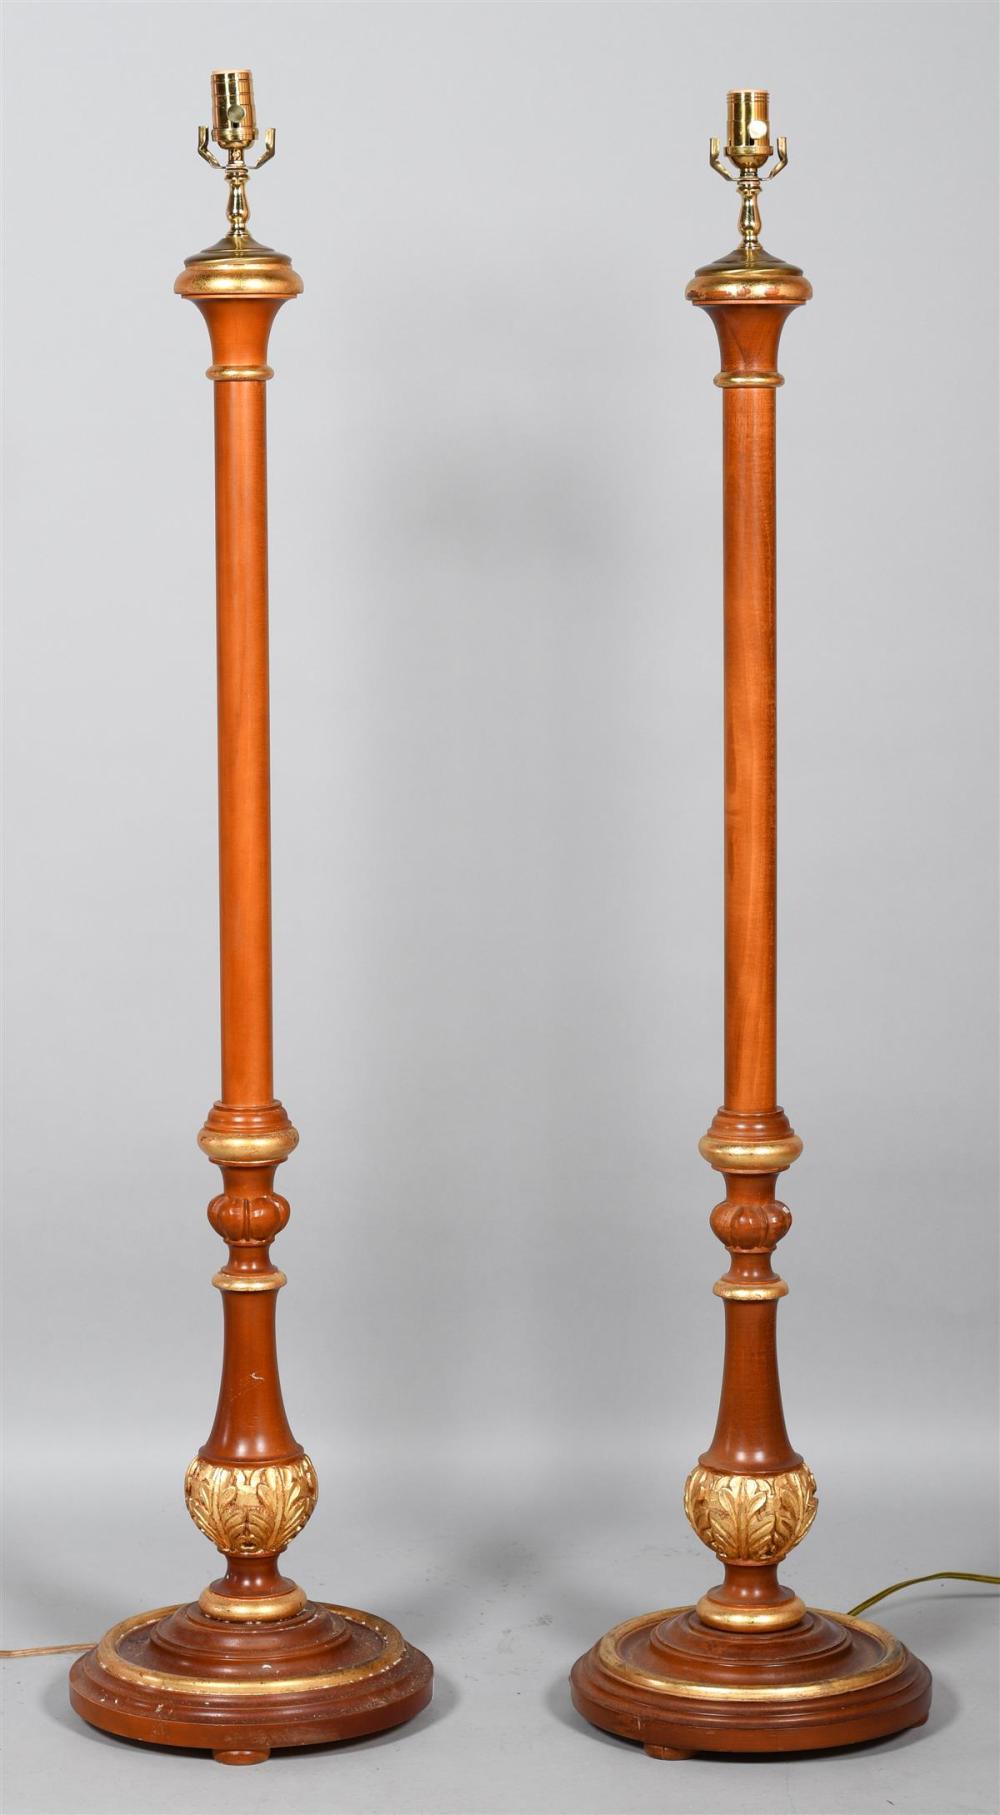 PAIR OF NEOCLASSICAL STYLE PARCEL-GILT